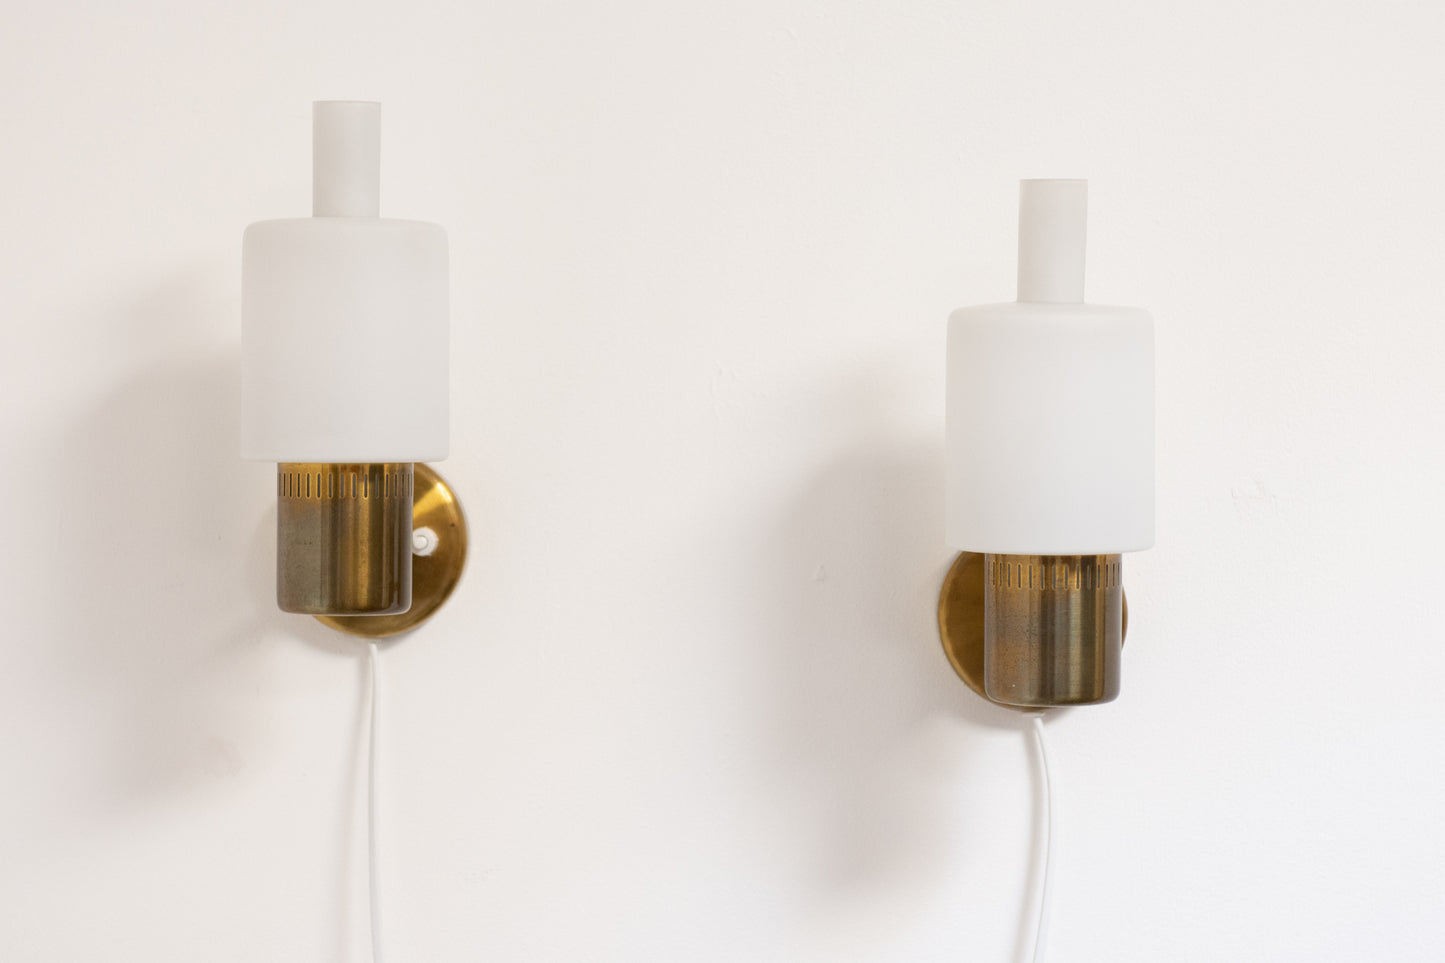 Pair of 'Nordlys' wall lights by Jo Hammerborg